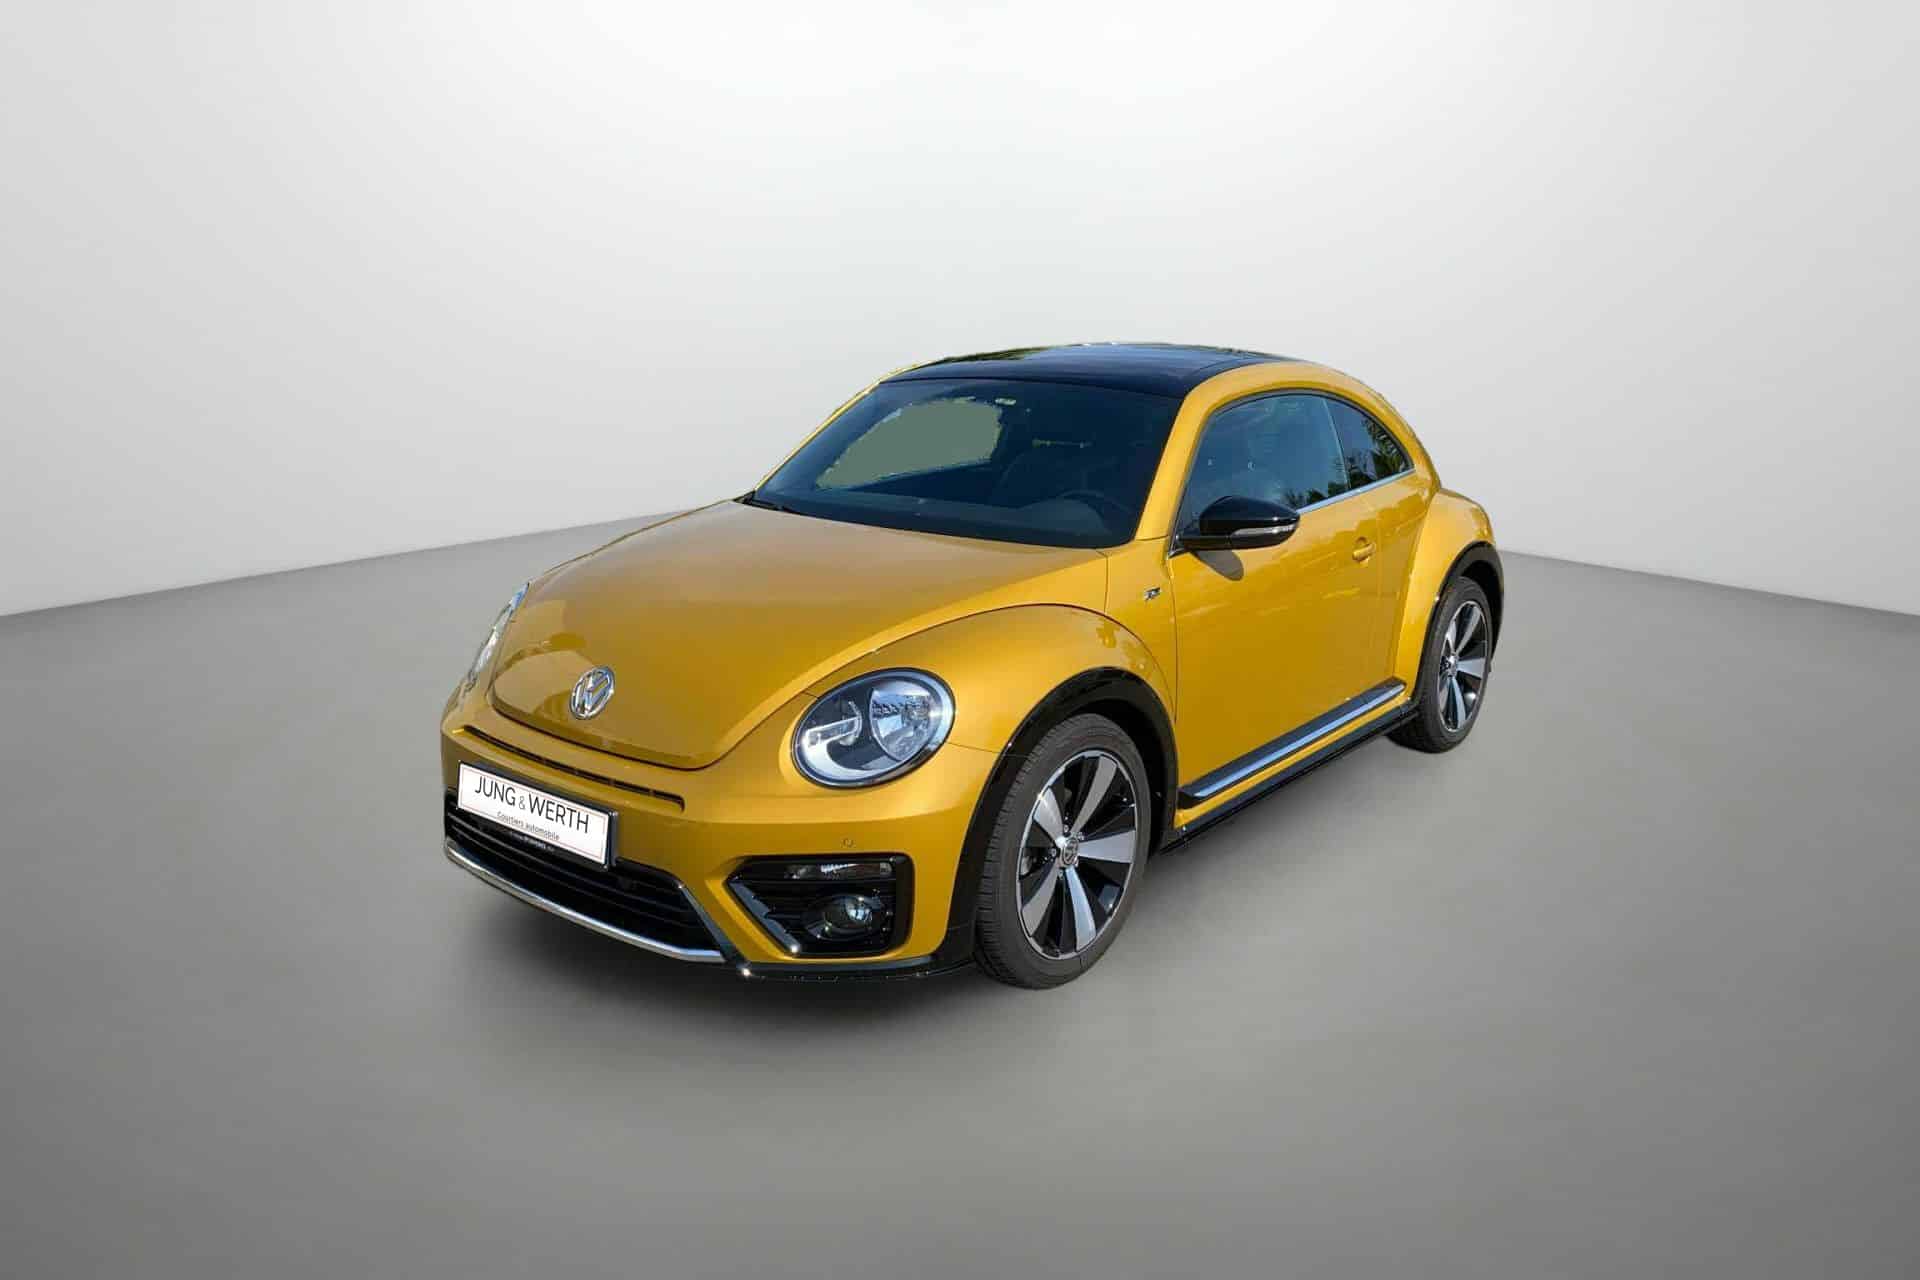 VW BEETLE R-LINE 1.4 TSI occasion import Allemagne